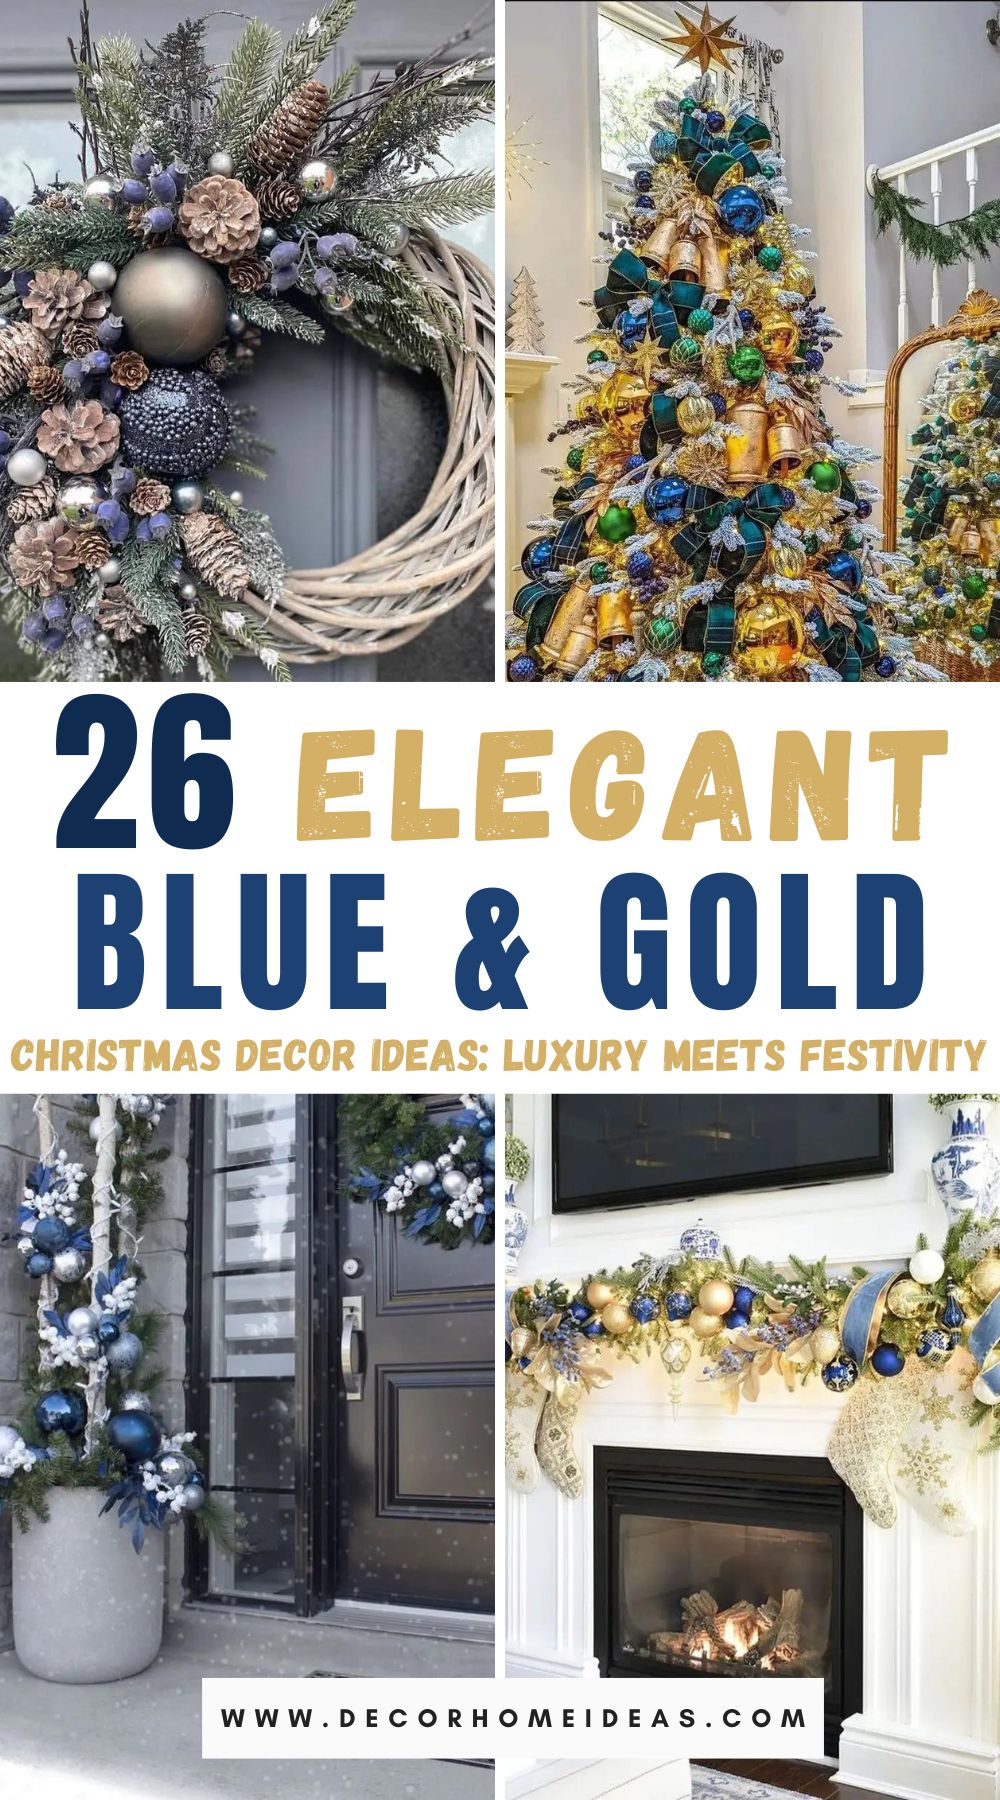 Looking for a blend of luxury and festivity? Explore 25 elegant blue and gold Christmas decor ideas.